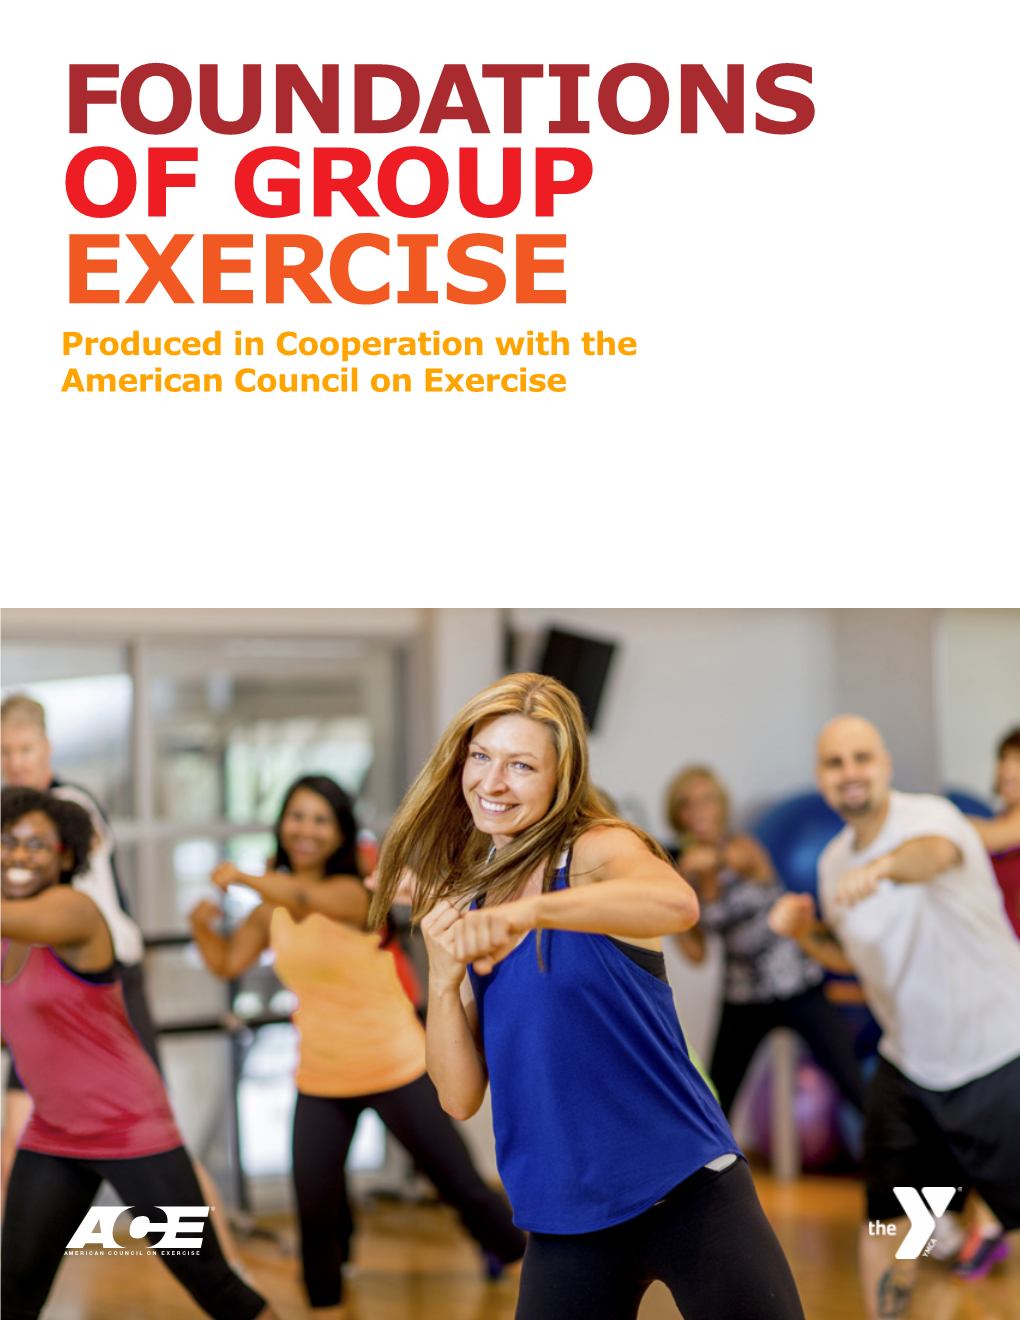 FOUNDATIONS of GROUP EXERCISE Produced in Cooperation with the American Council on Exercise Copyright© 2016 American Council on Exercise®